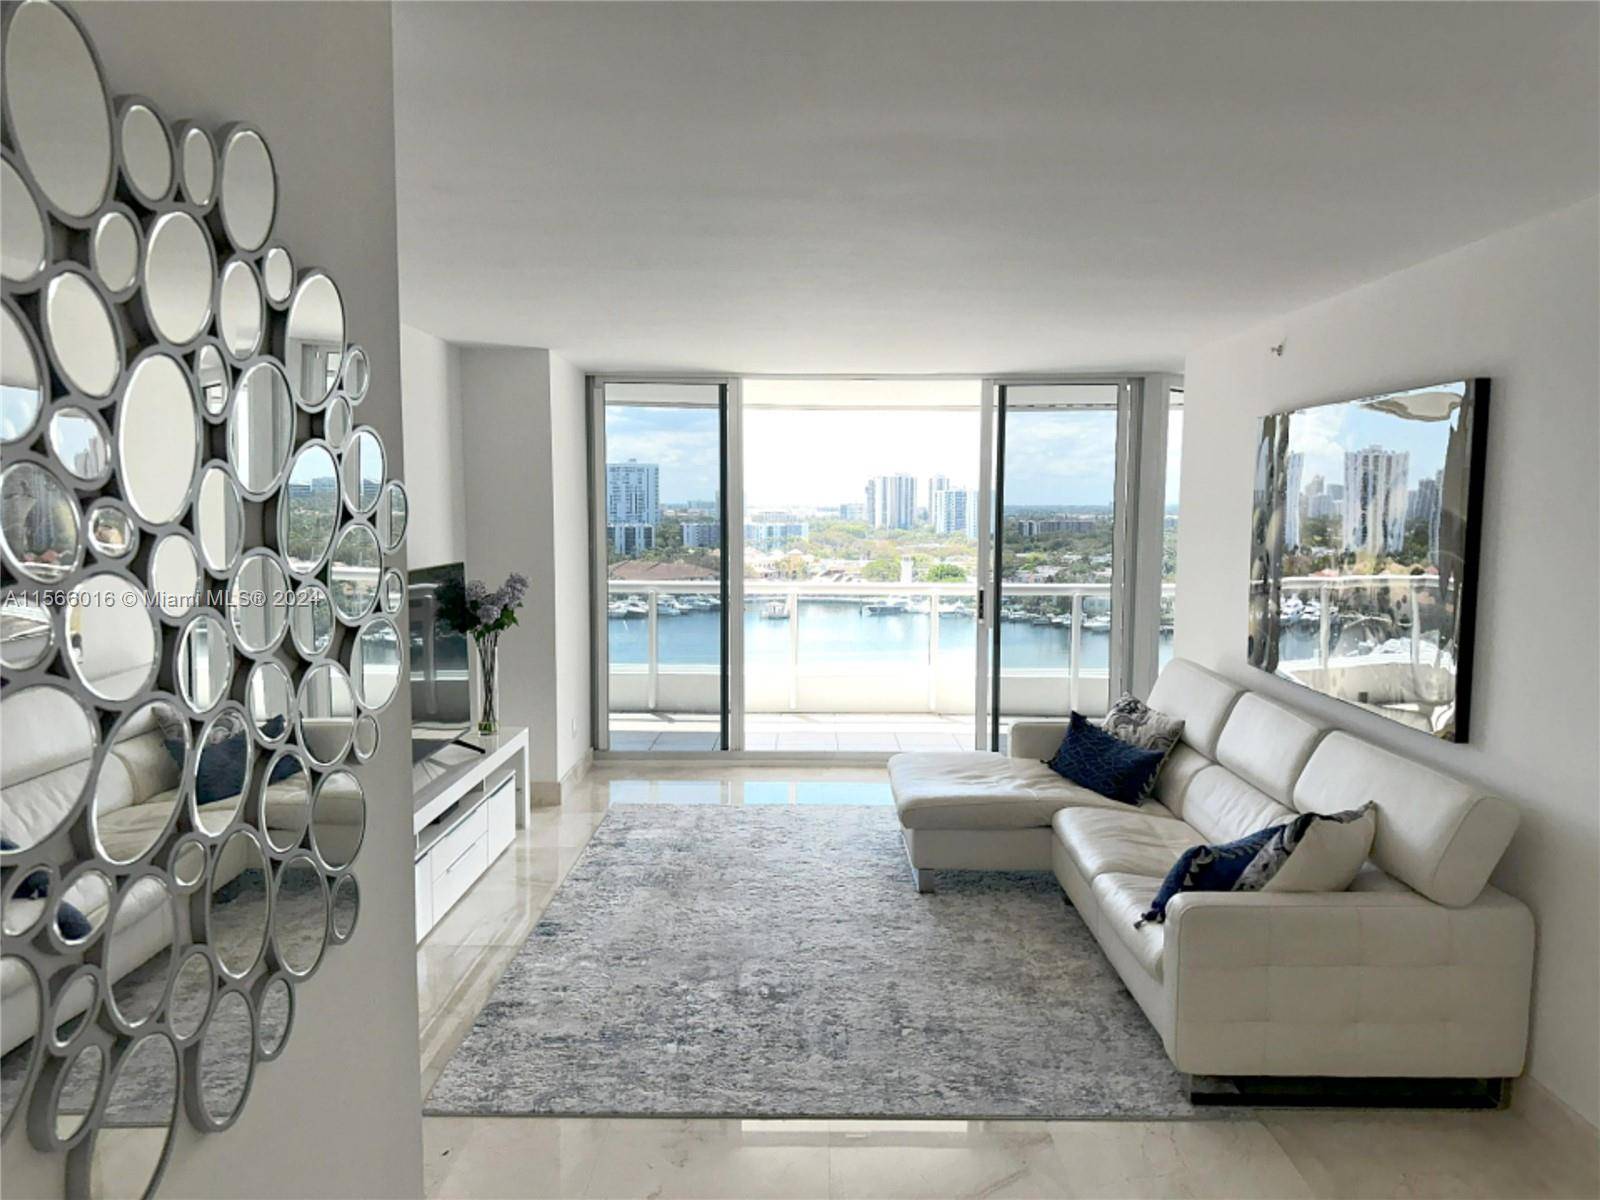 Gorgeous 2 bedroom 2 bath luxury condo with unobstructed panoramic views of the WATER, Marina and City, from every room.